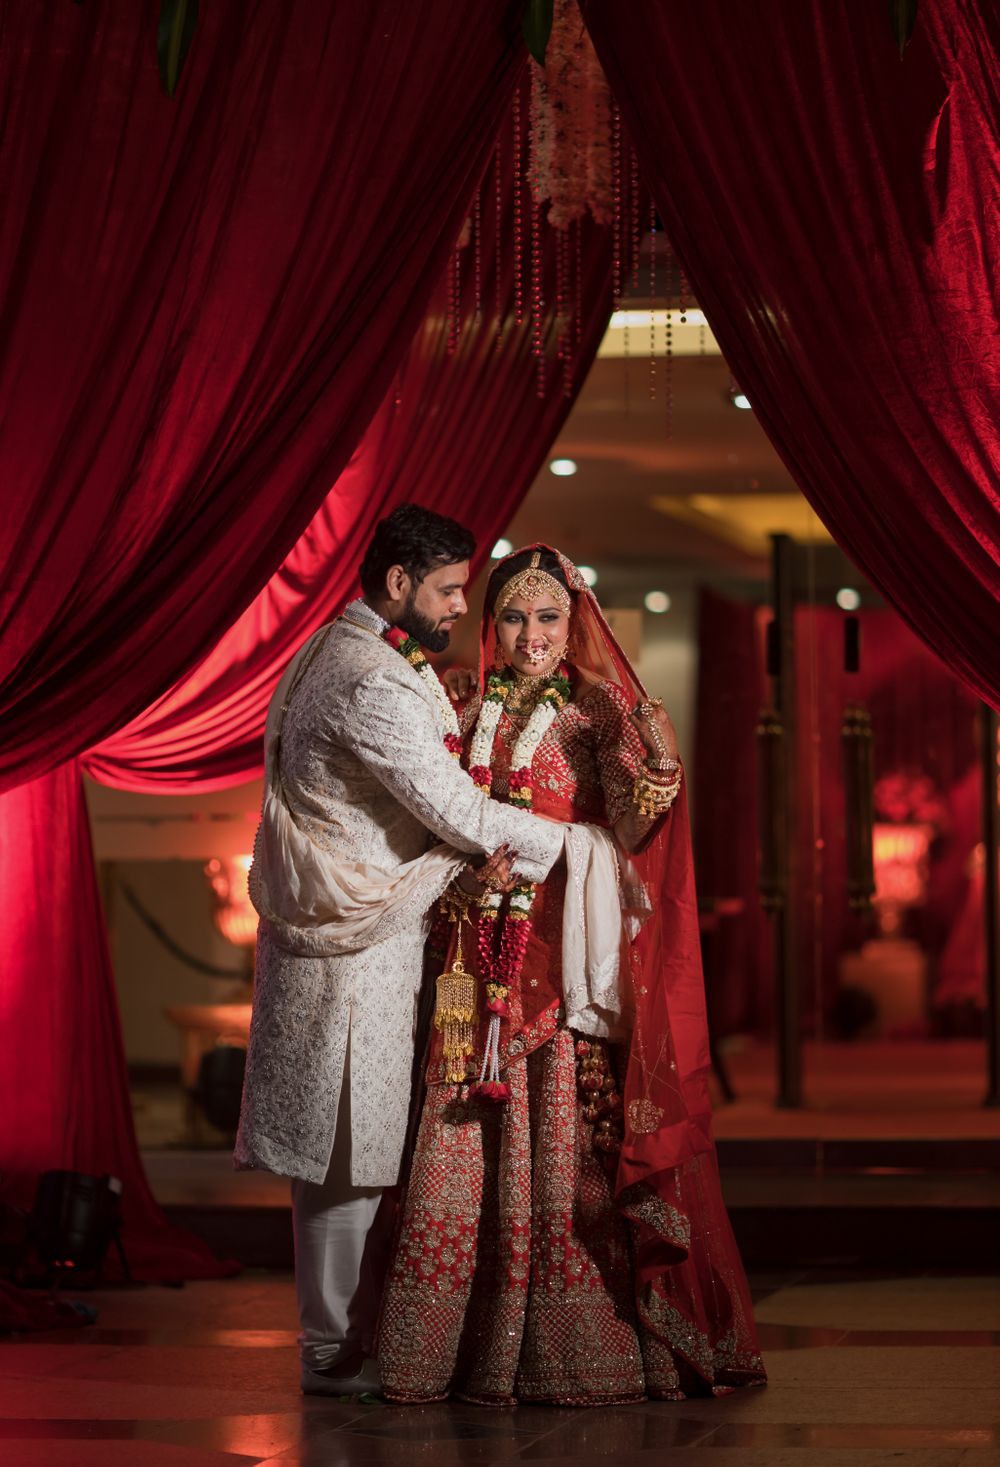 Photo From Arjun & Meghna - By Pixel and Lens